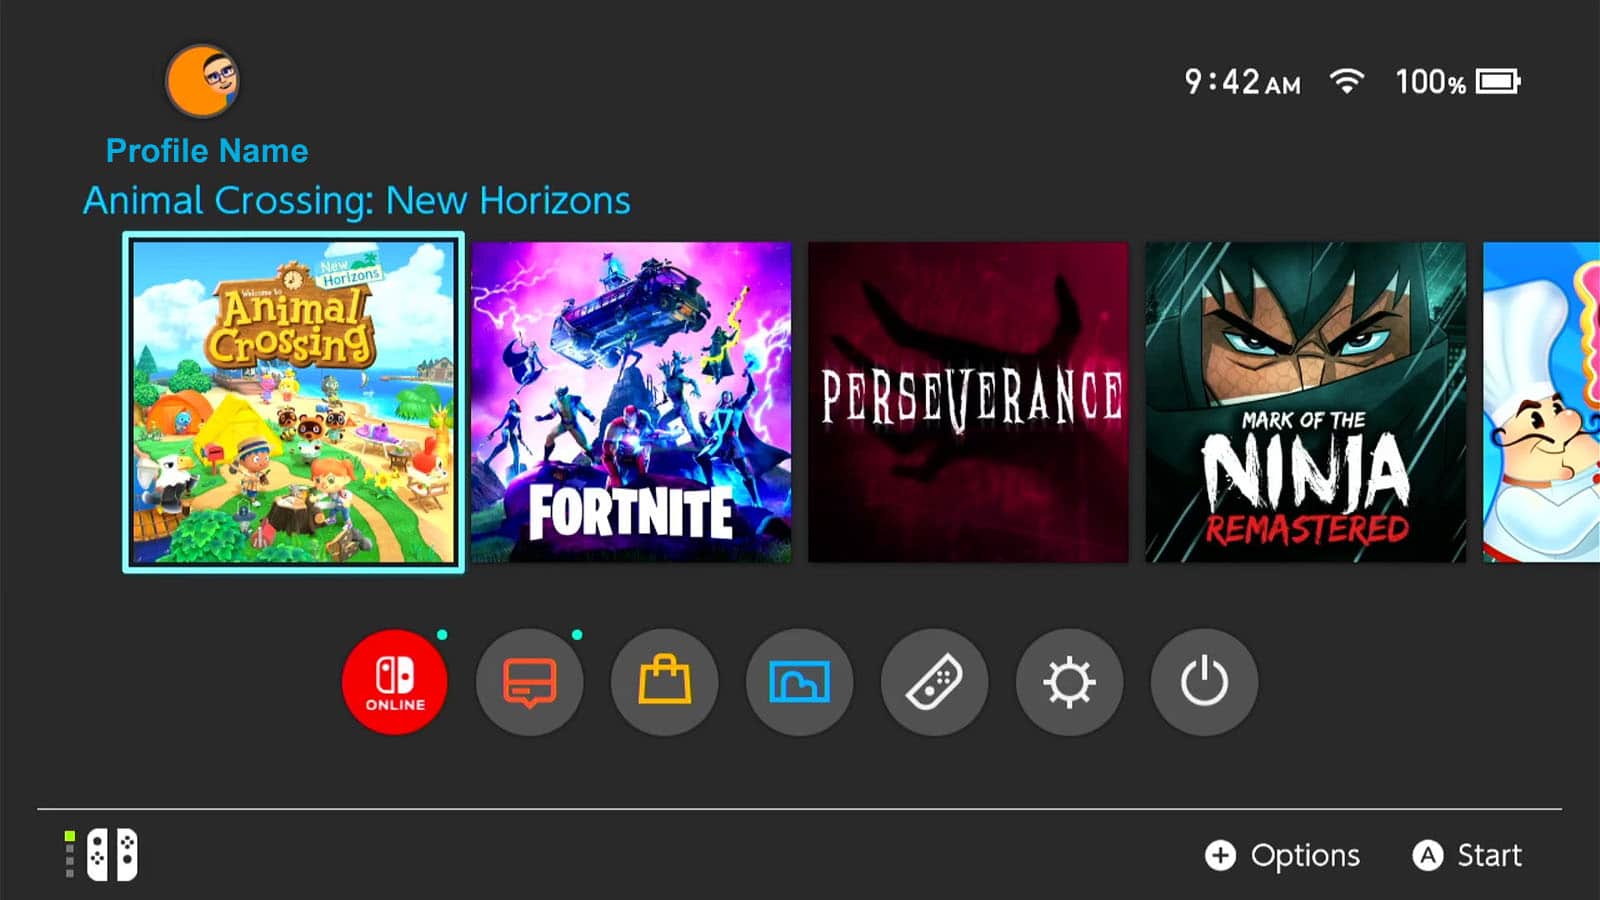 Nintendo Switch Home Menu screen with game icons in the center